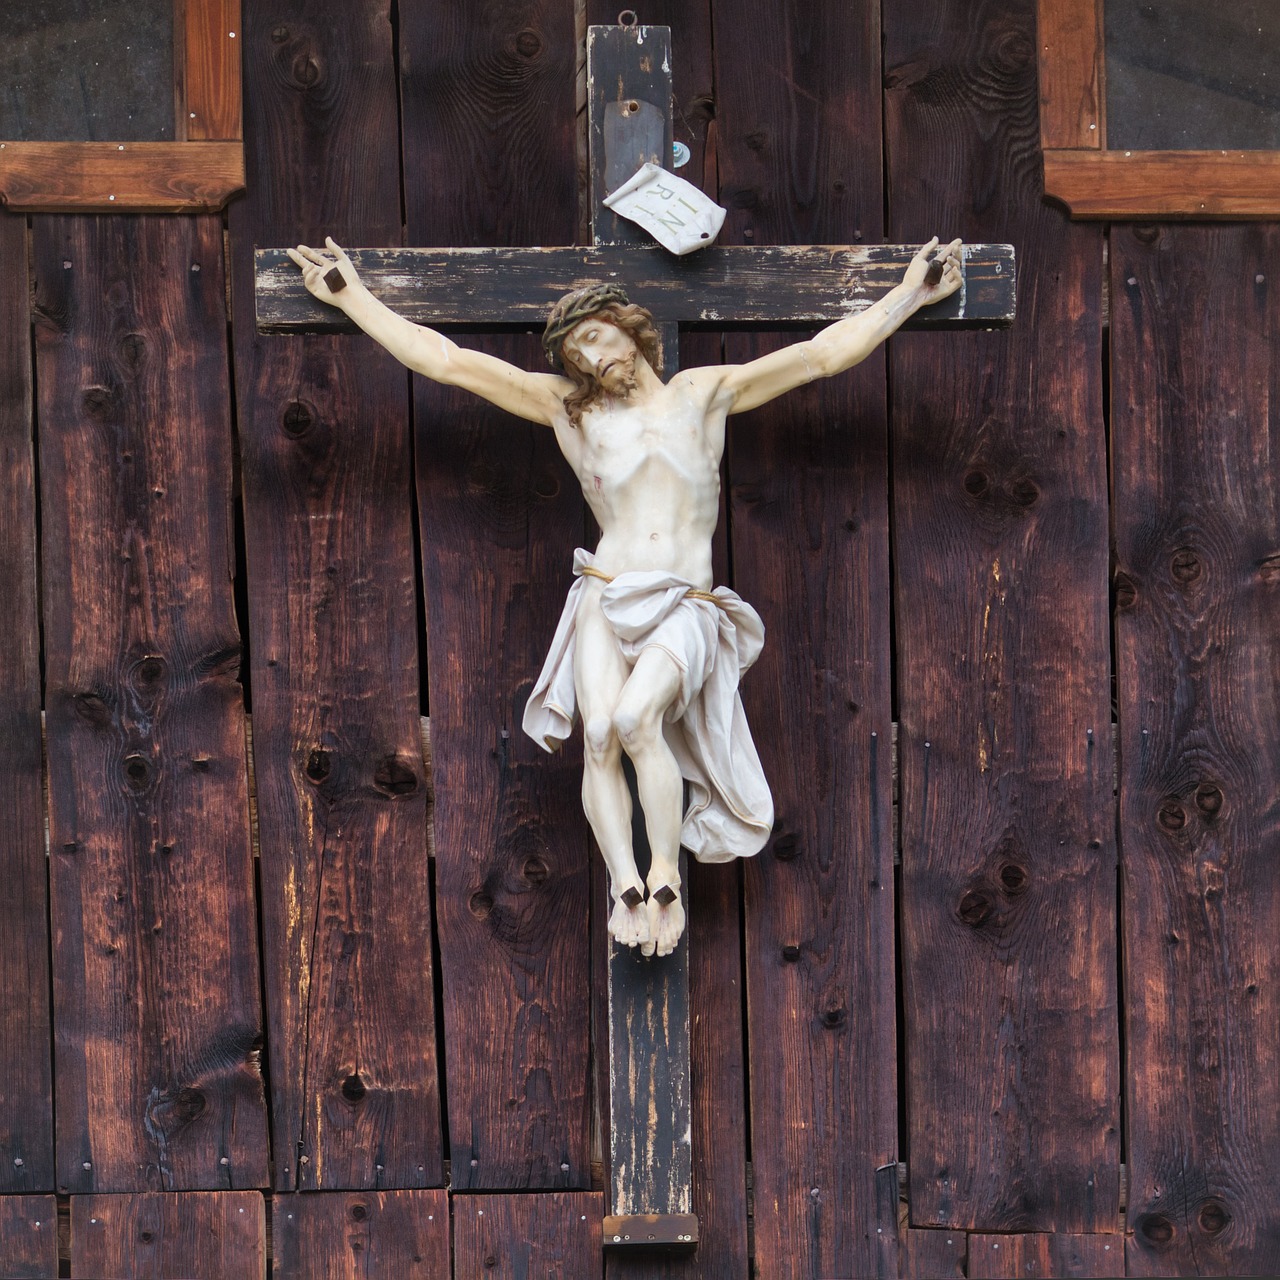 a statue of jesus on a wooden cross, a picture, by Erwin Bowien, shutterstock, hung above the door, colorado, rustic, very very well detailed image